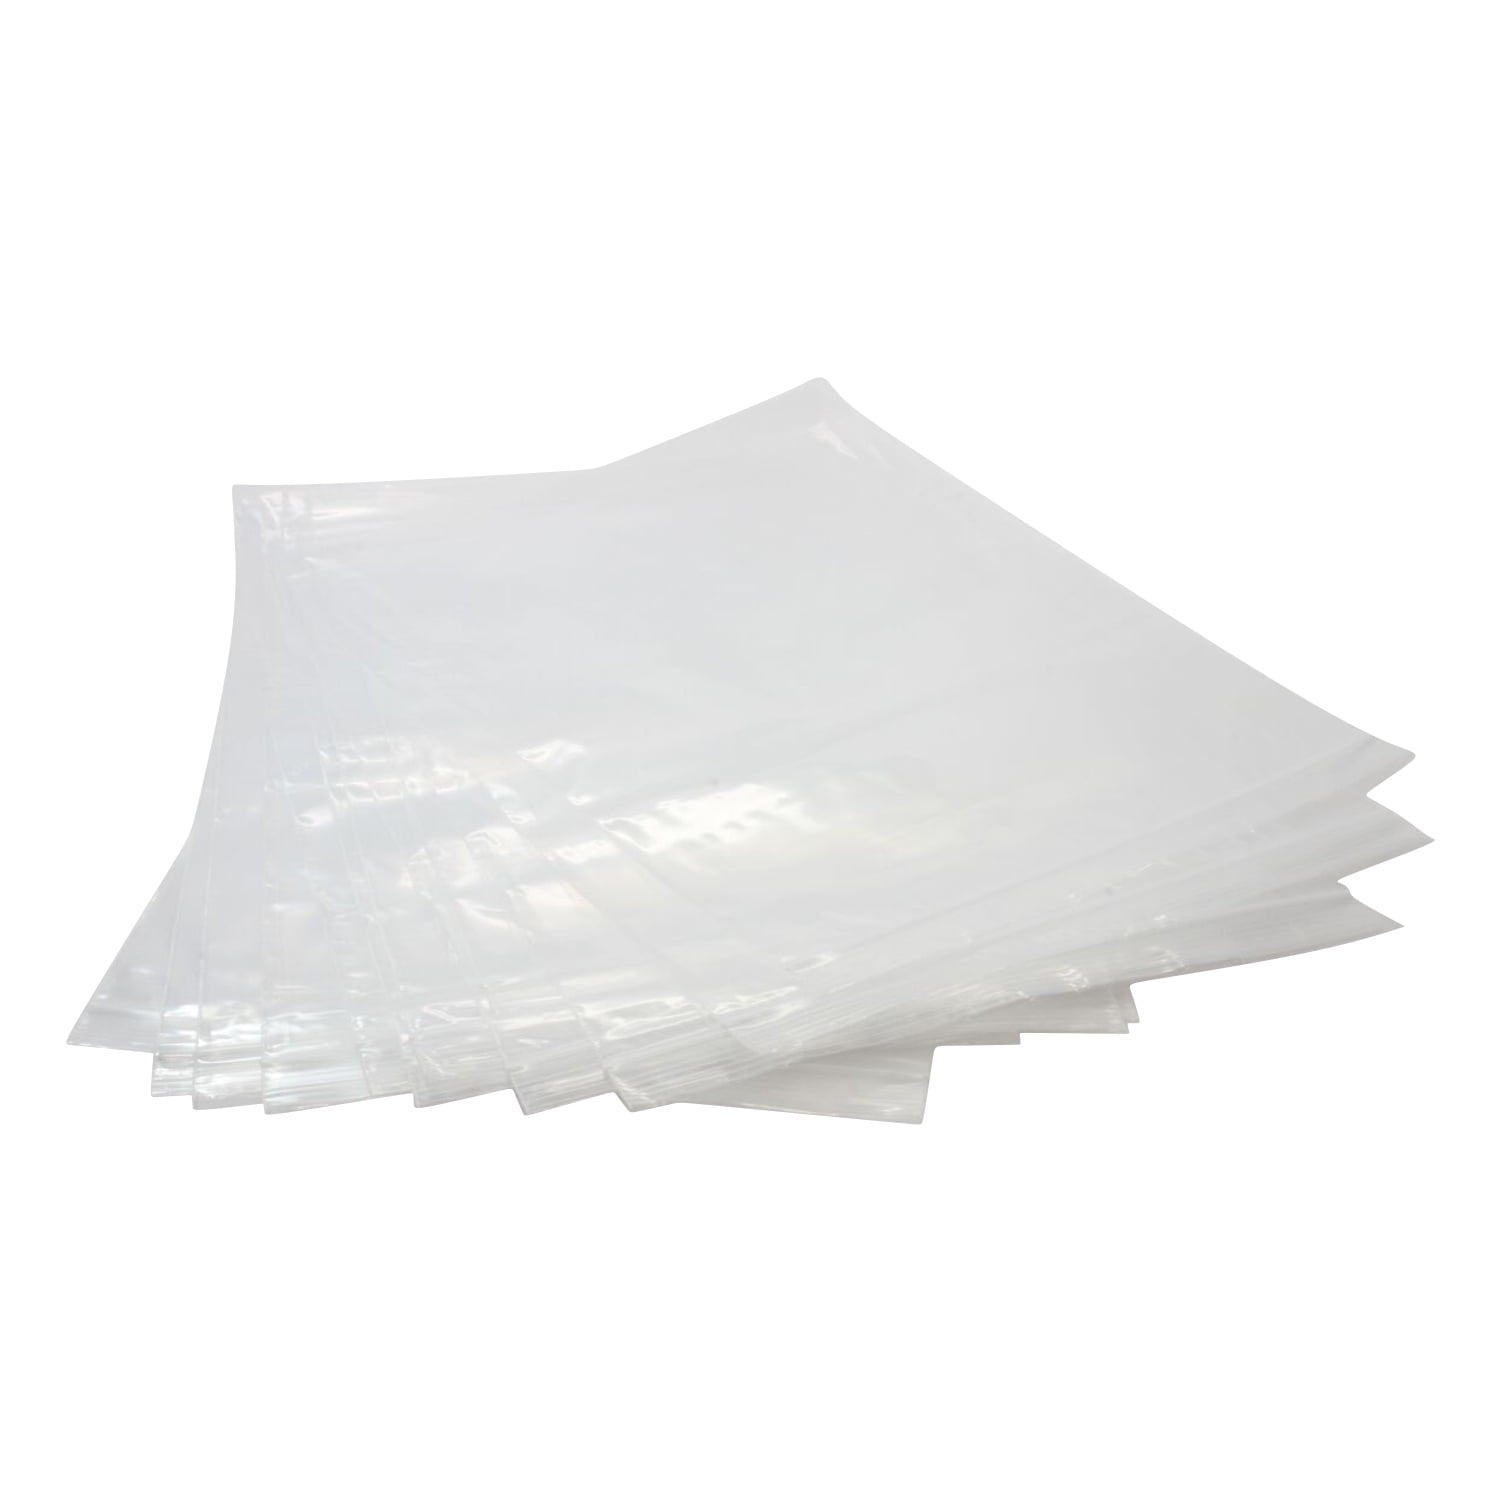 Clear Flat Polyethylene Poly Plastic Bags 9" x 12" 200 pc 2 Mil FREE SHIPPING 